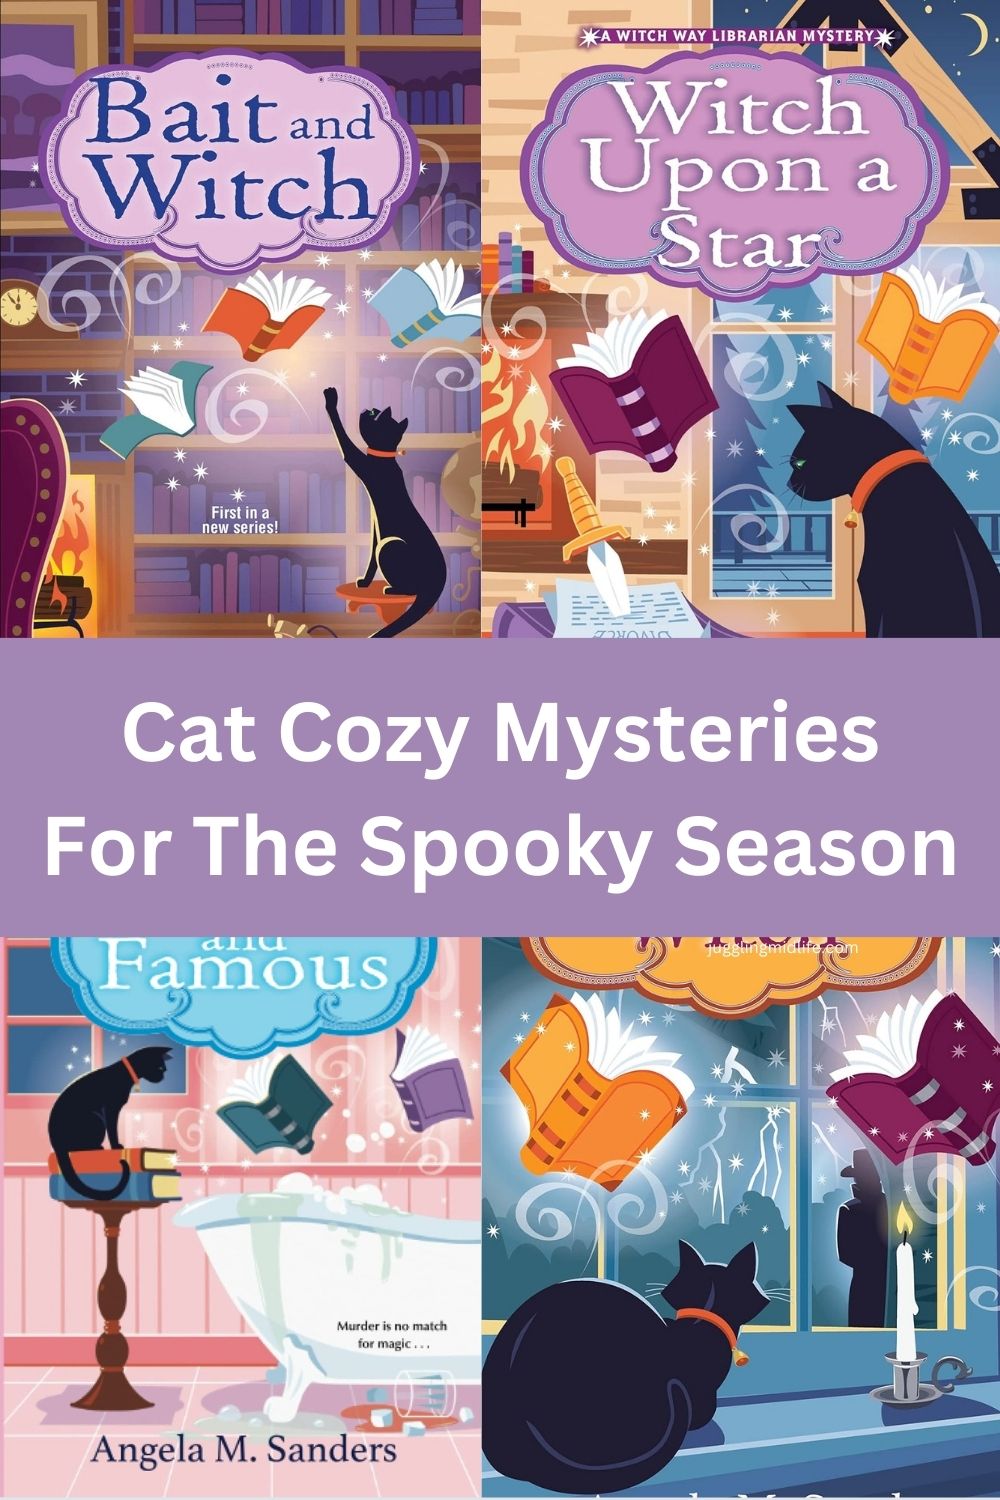 cat cozy mysteries spooky season book recommendations